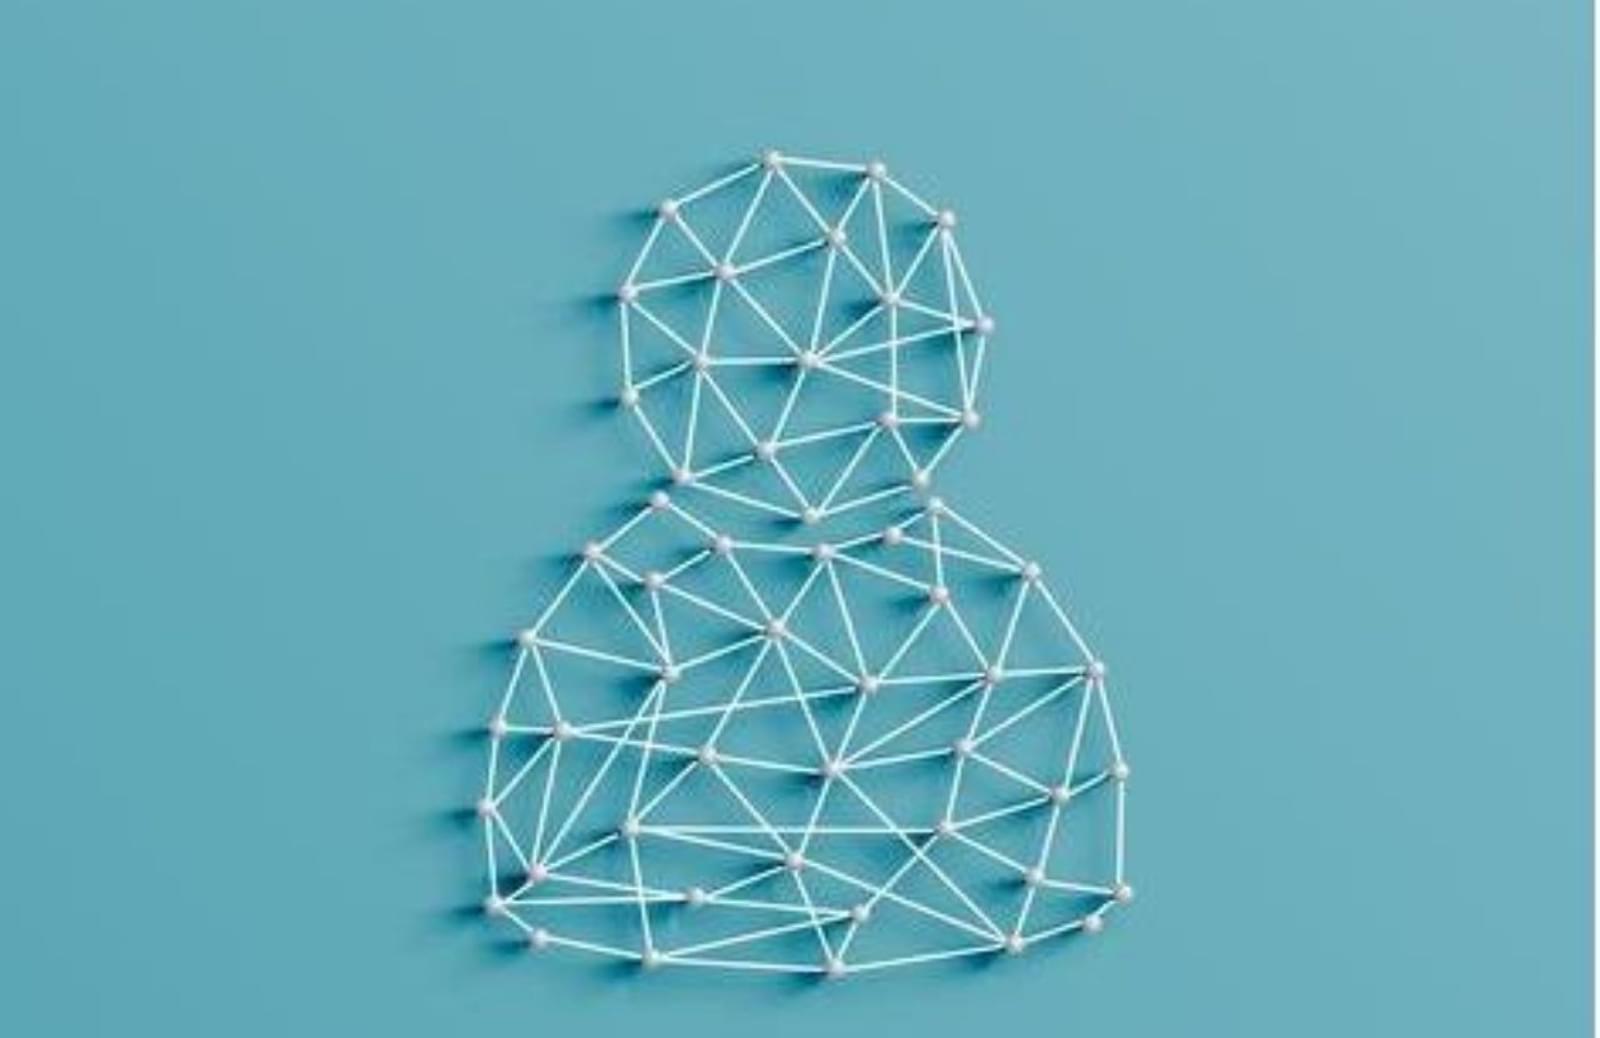 String art of head and shoulders against a blue background